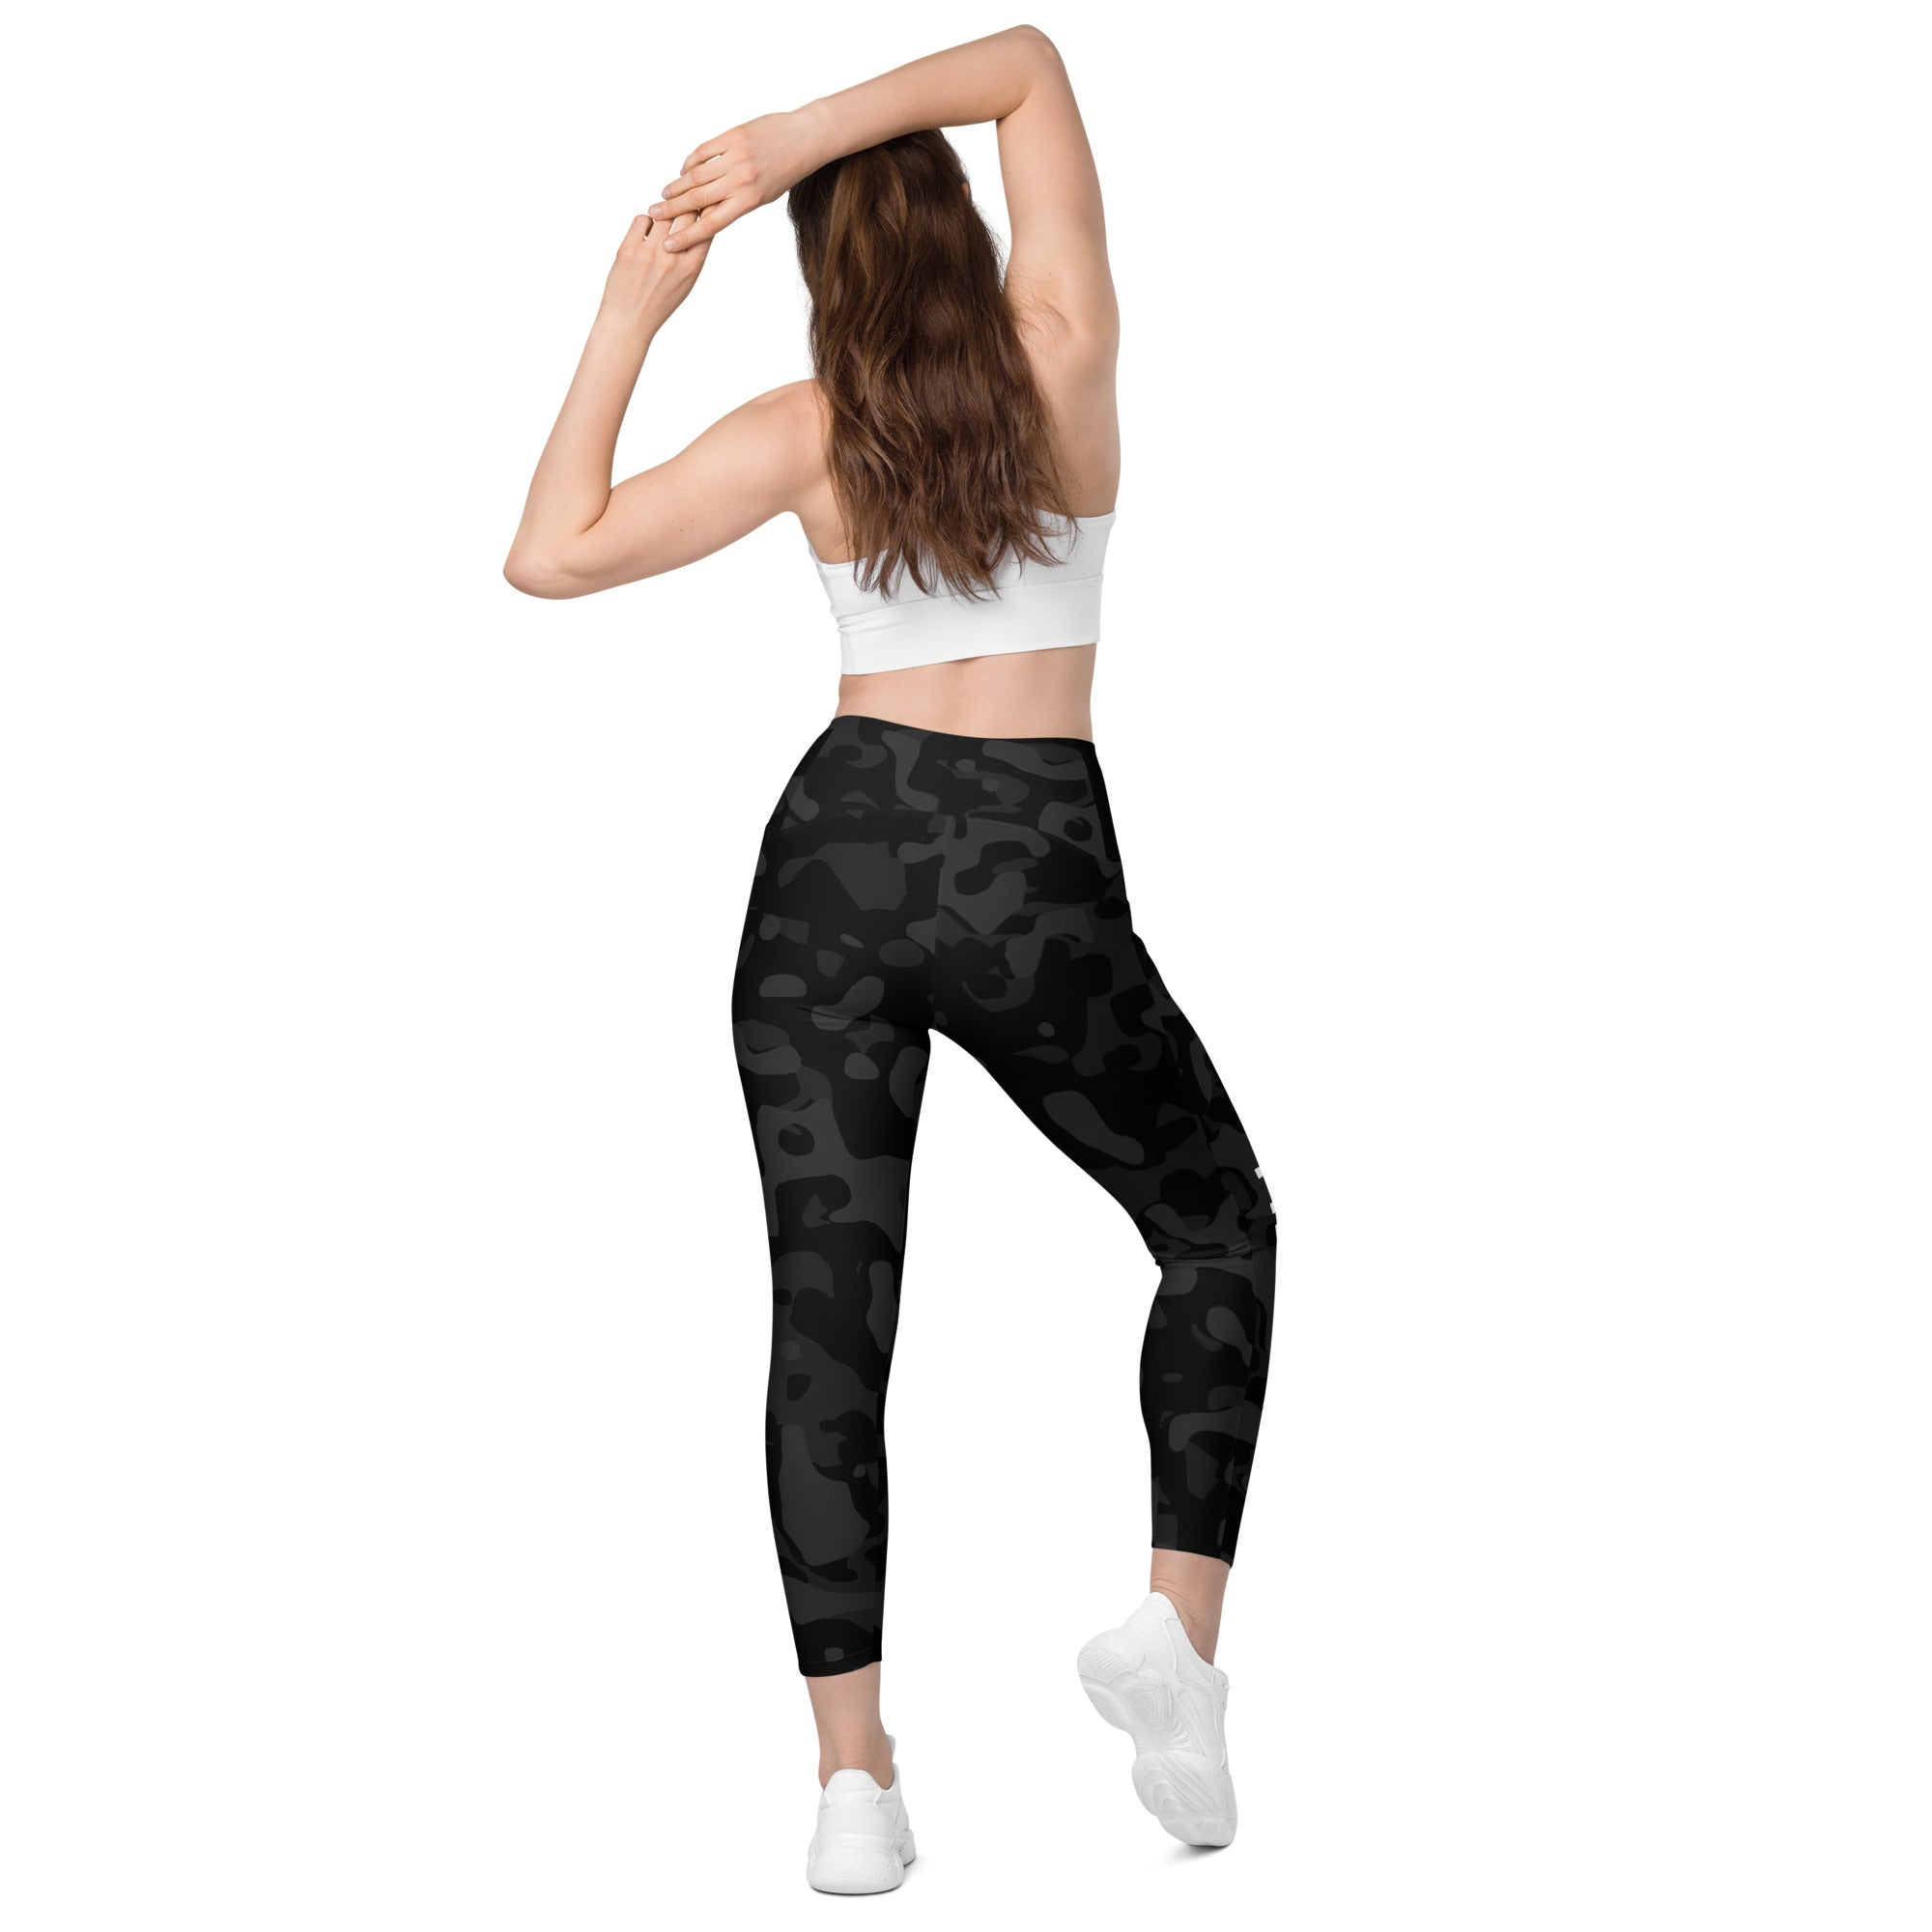 all-over-print-crossover-leggings-with-pockets-white-back-63169ed2a3ffb.jpg